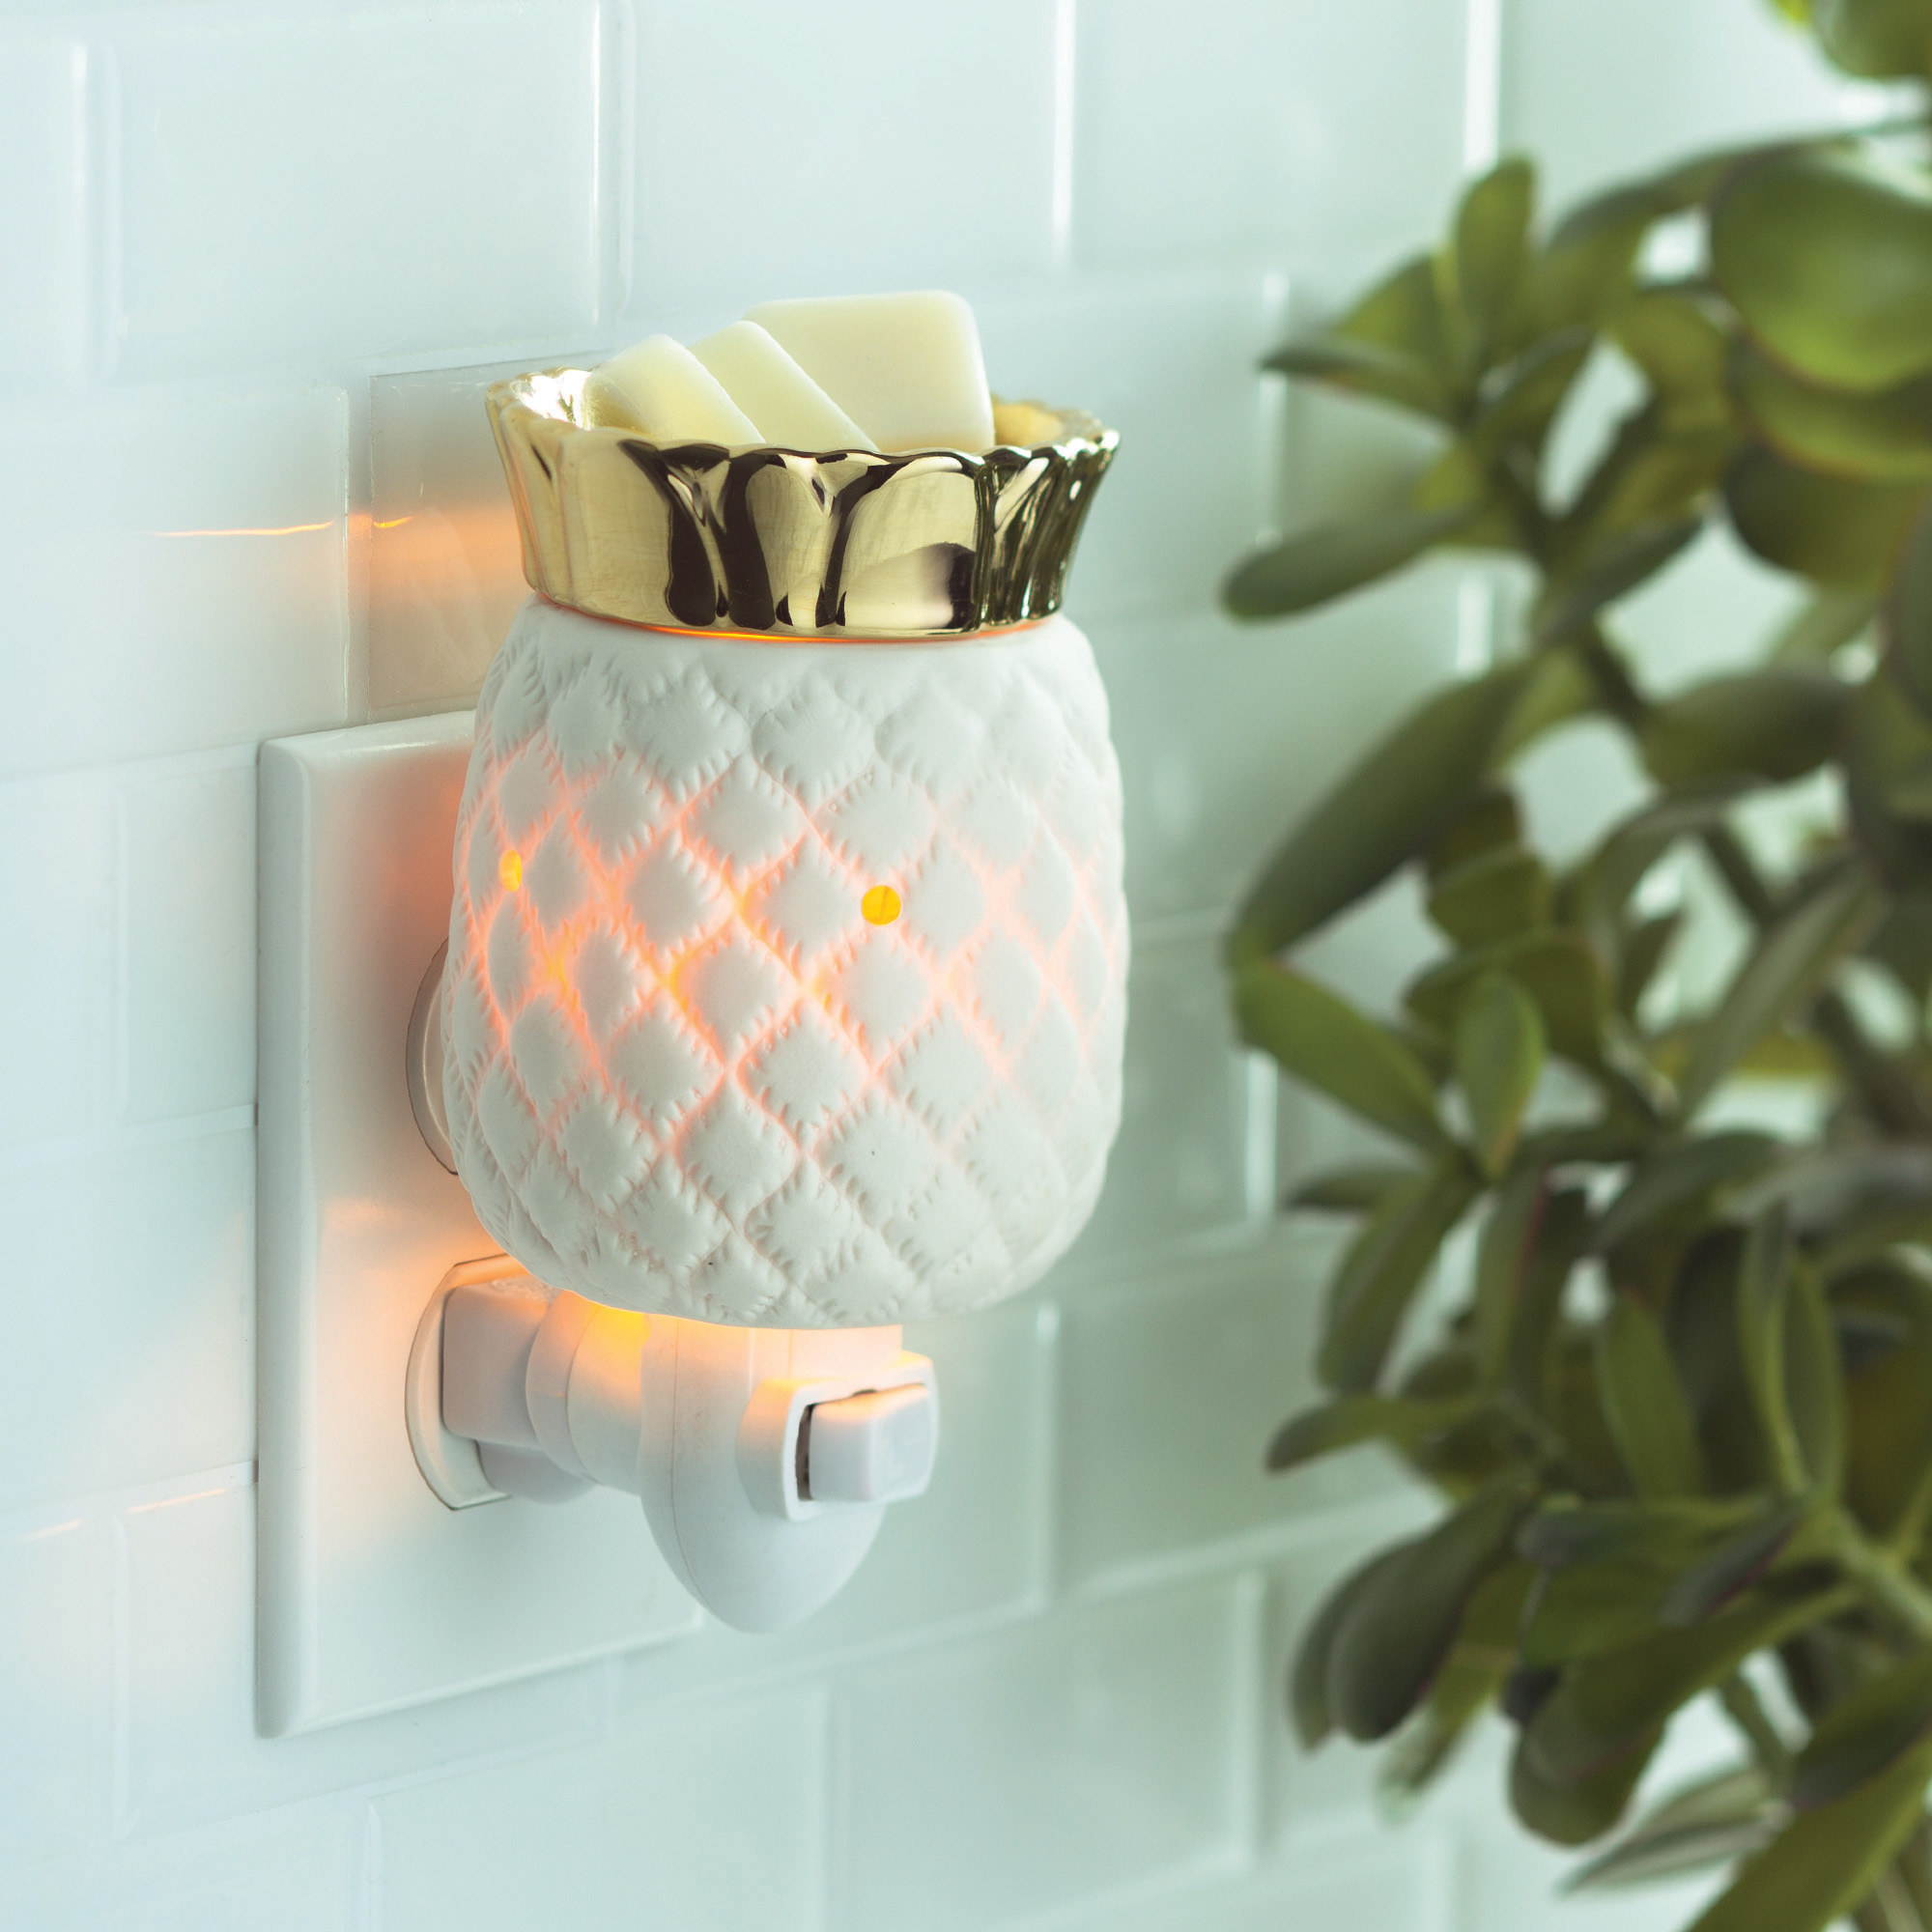 the pineapple warmer plugged into an outlet with wax on the top